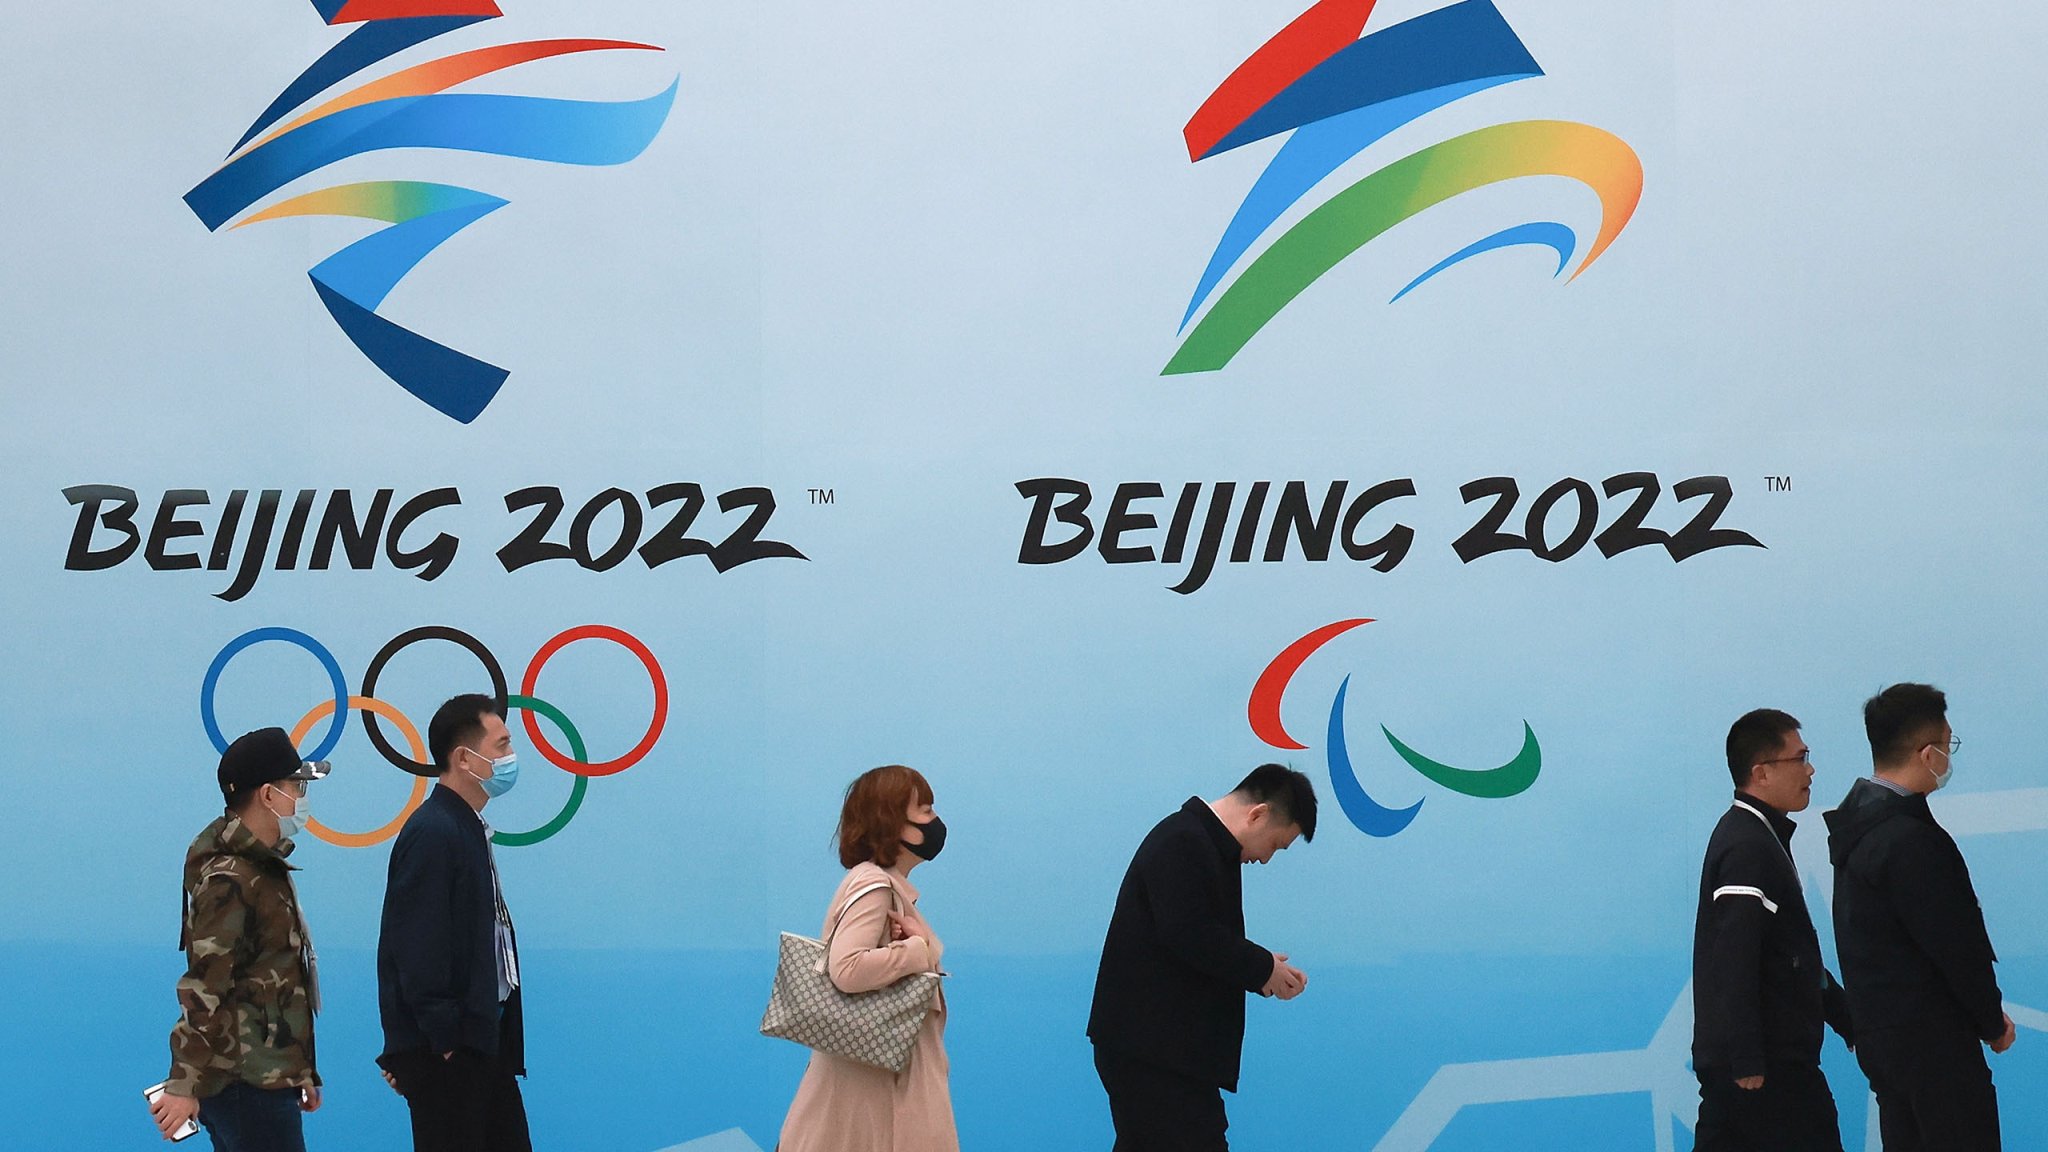 Ahead of the 2022 Winter Olympics in Beijing - cover